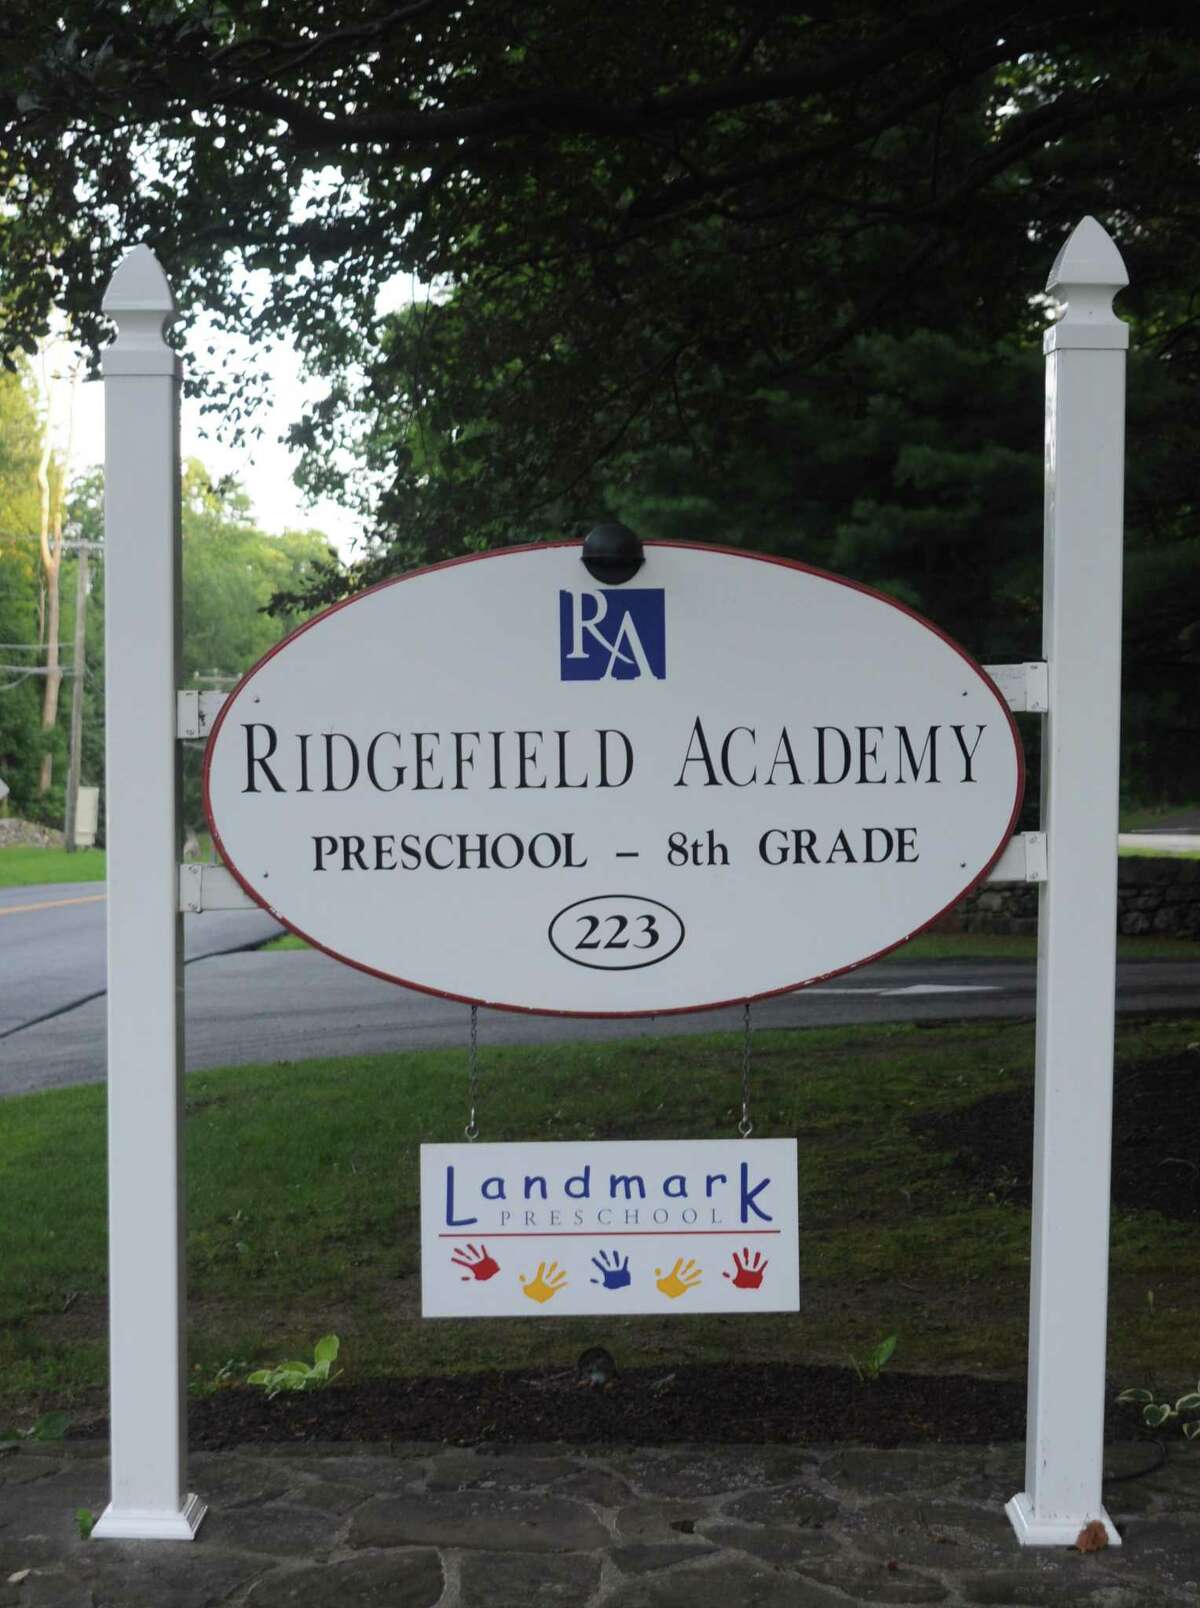 The main parcel of 17 acres purchased by the town is across the street from Ridgefield.